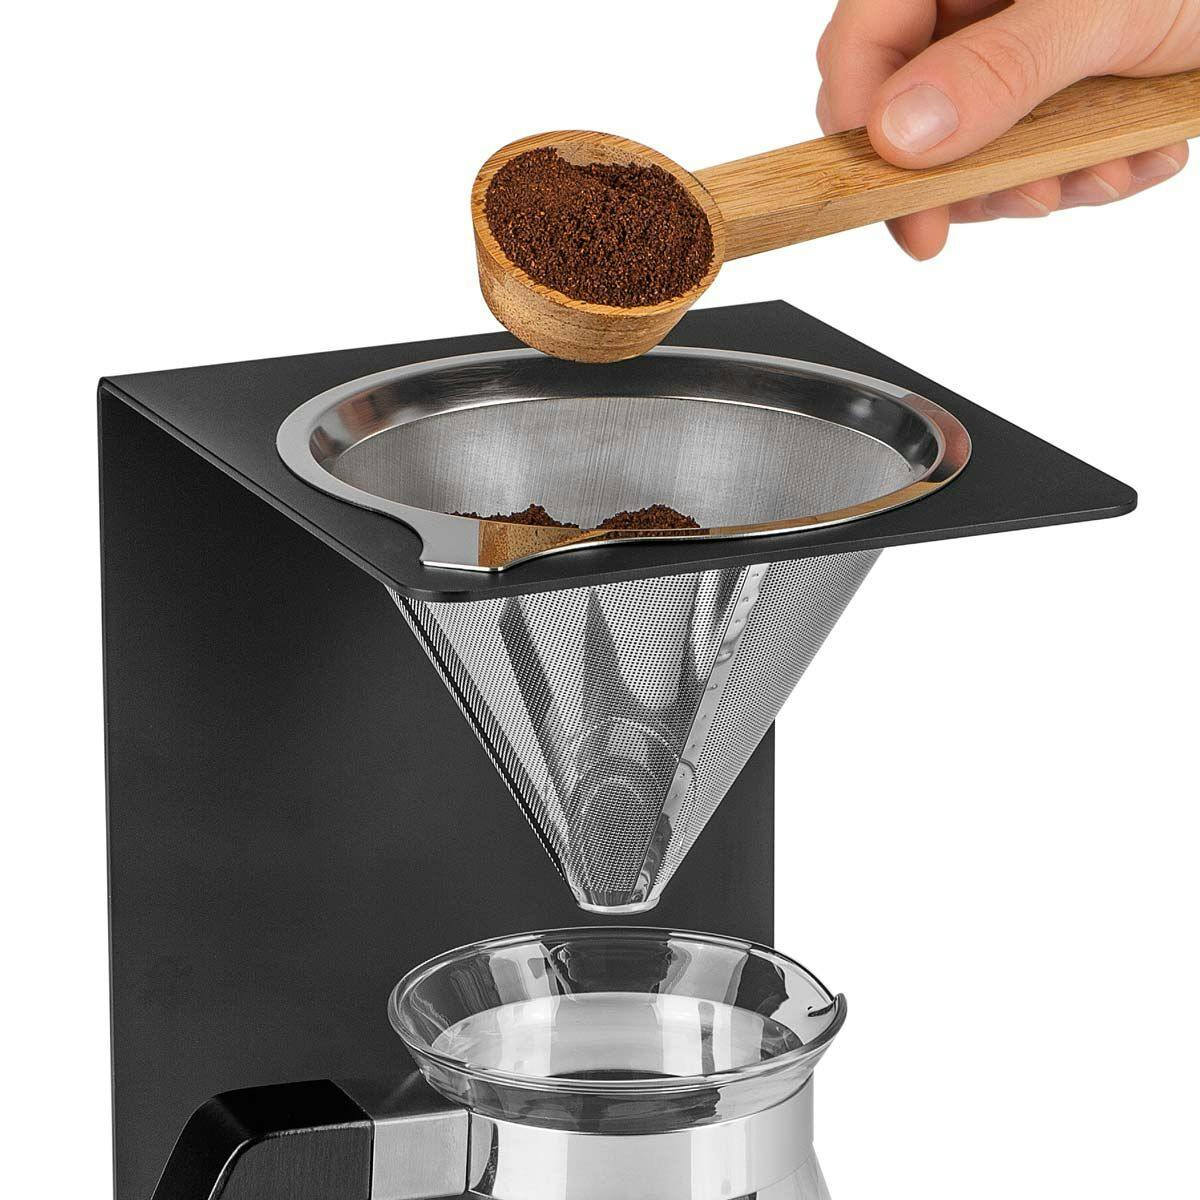 BEEM Coffee Maker Set For Oven in Concrete - 0.5 liters